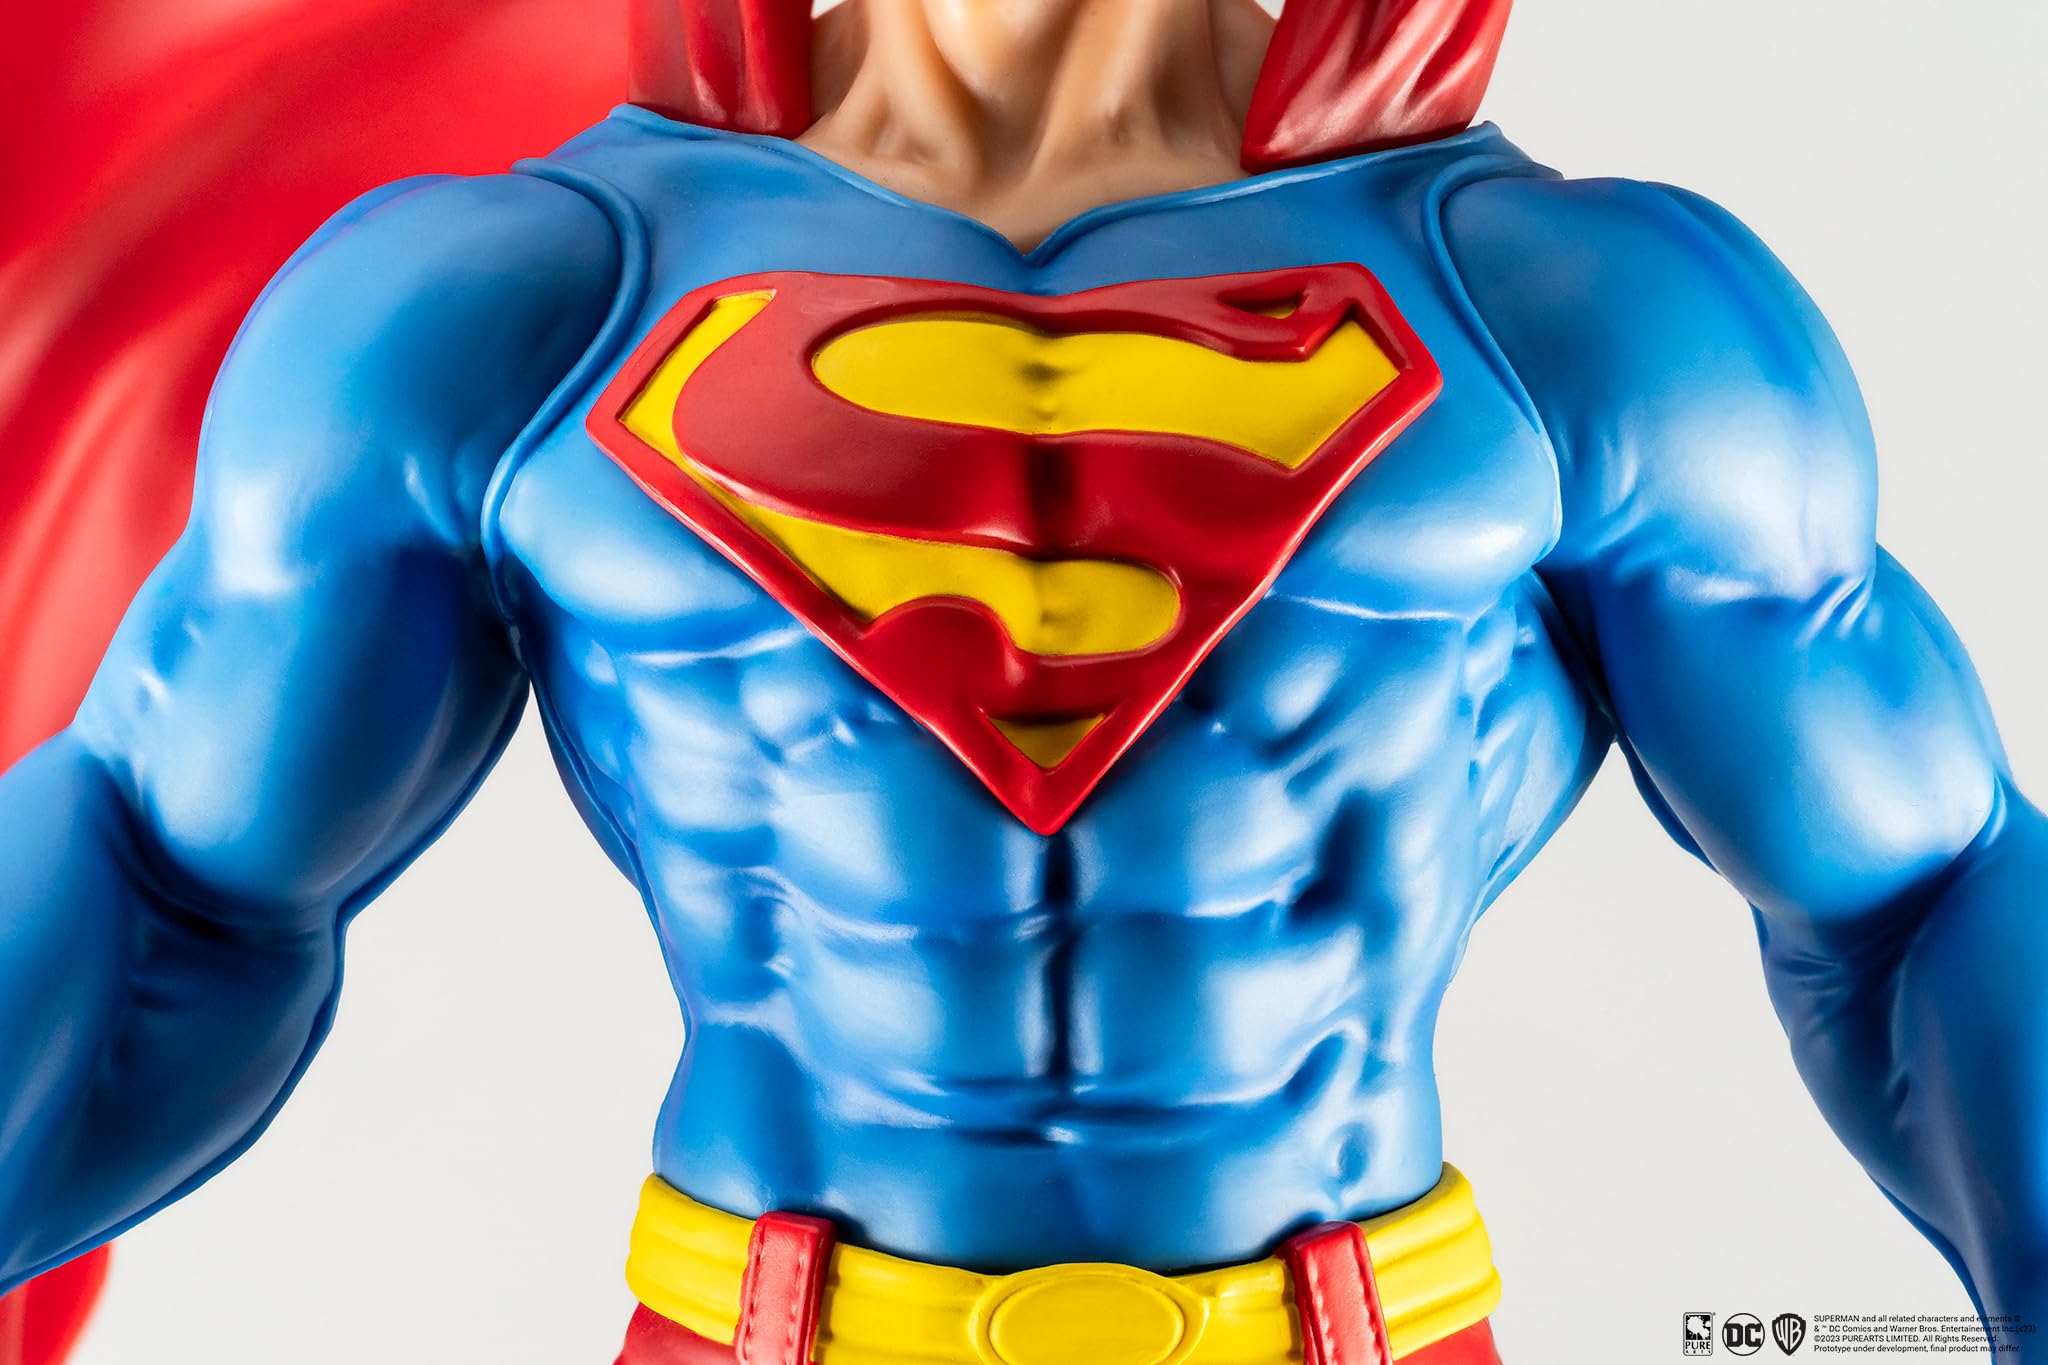 DC Heroes: Superman (Classic Version) Previews Exclusive 1:8 Scale Statue